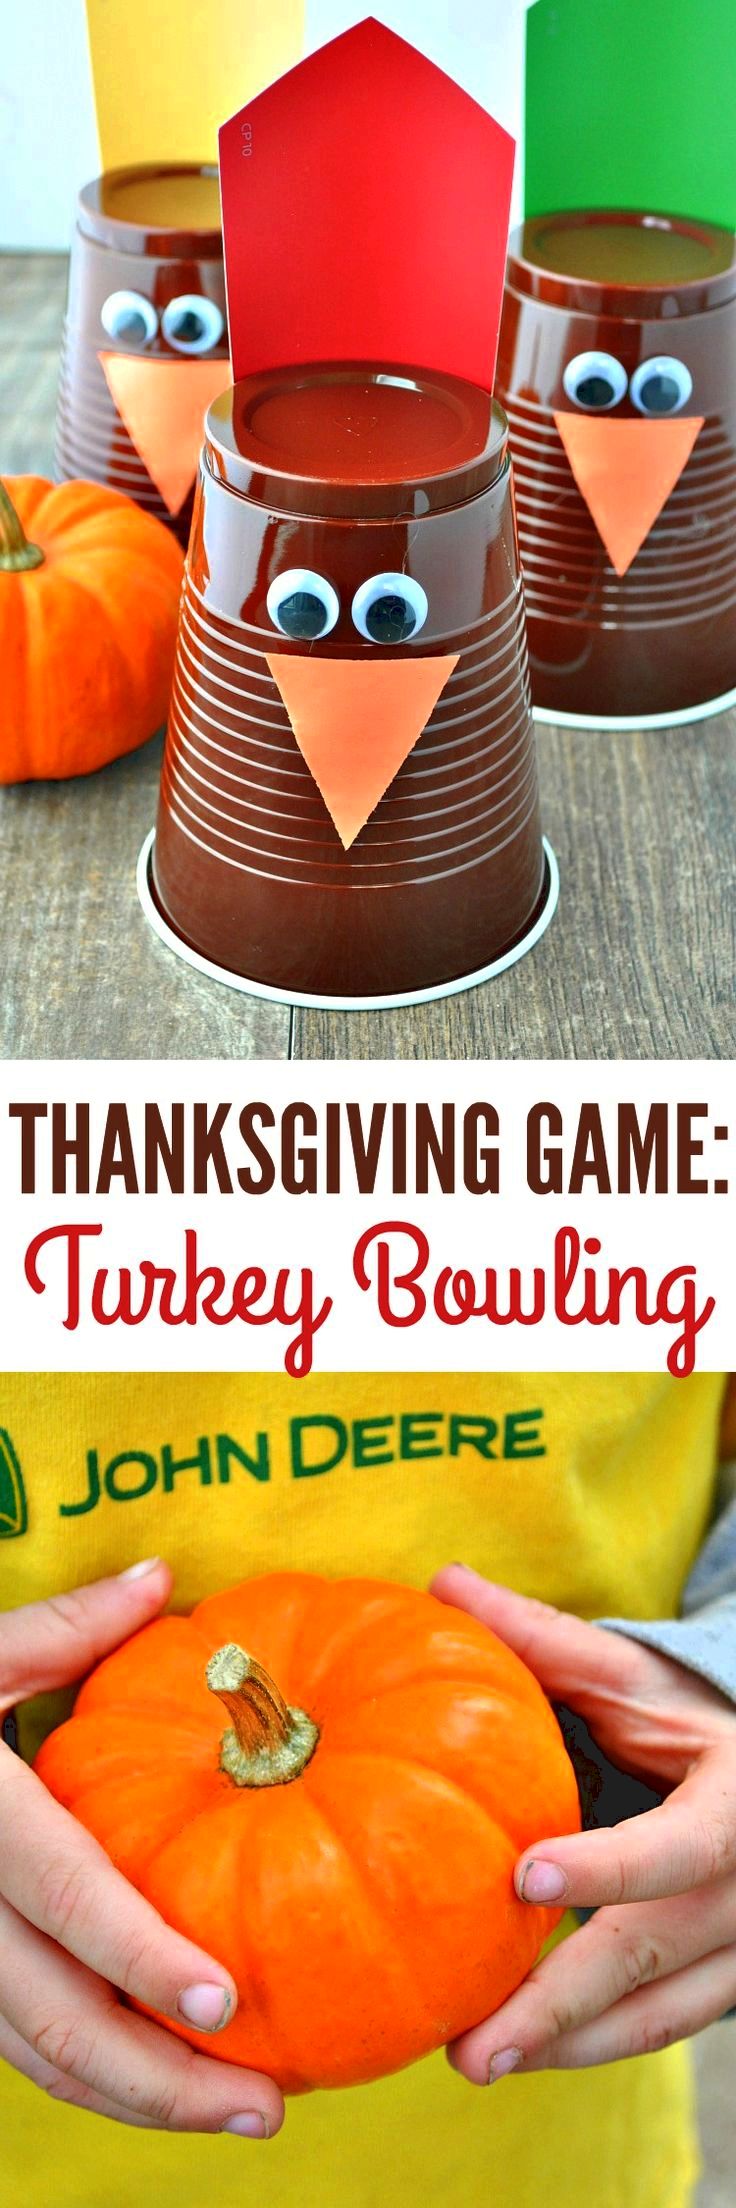 Thanksgiving games fun for children & adults appears better to just